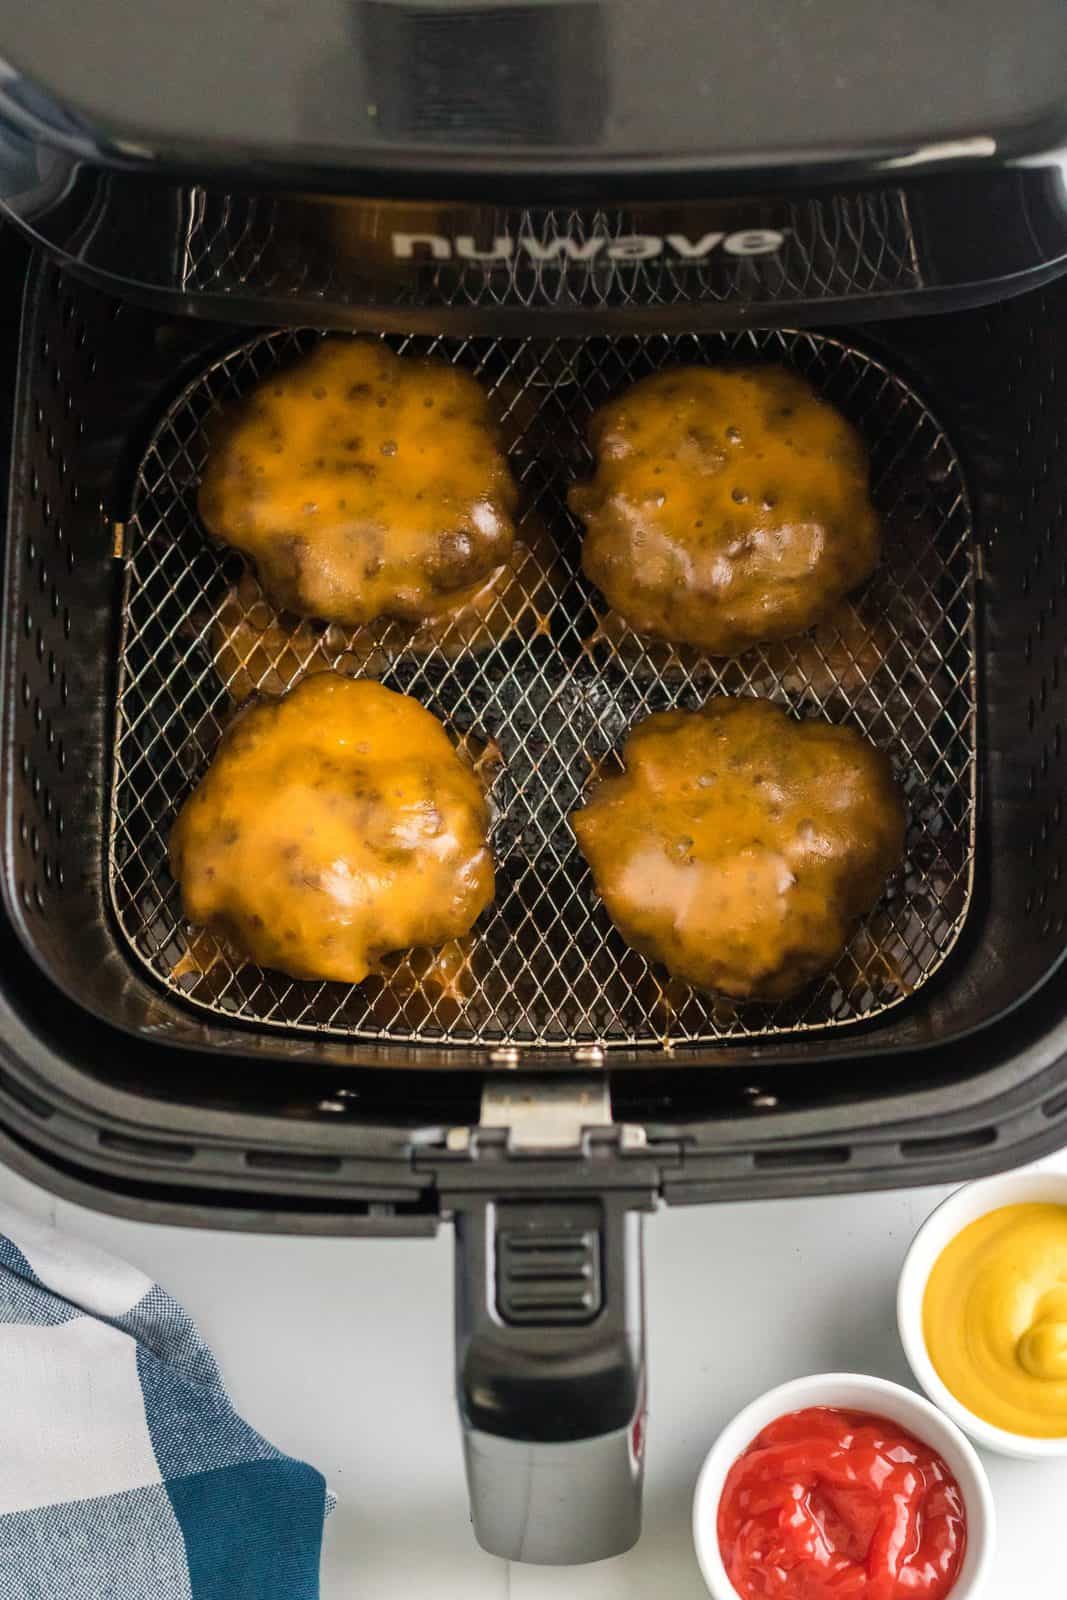 Cheese melted over Air Fryer Hamburgers in air fryer basket.